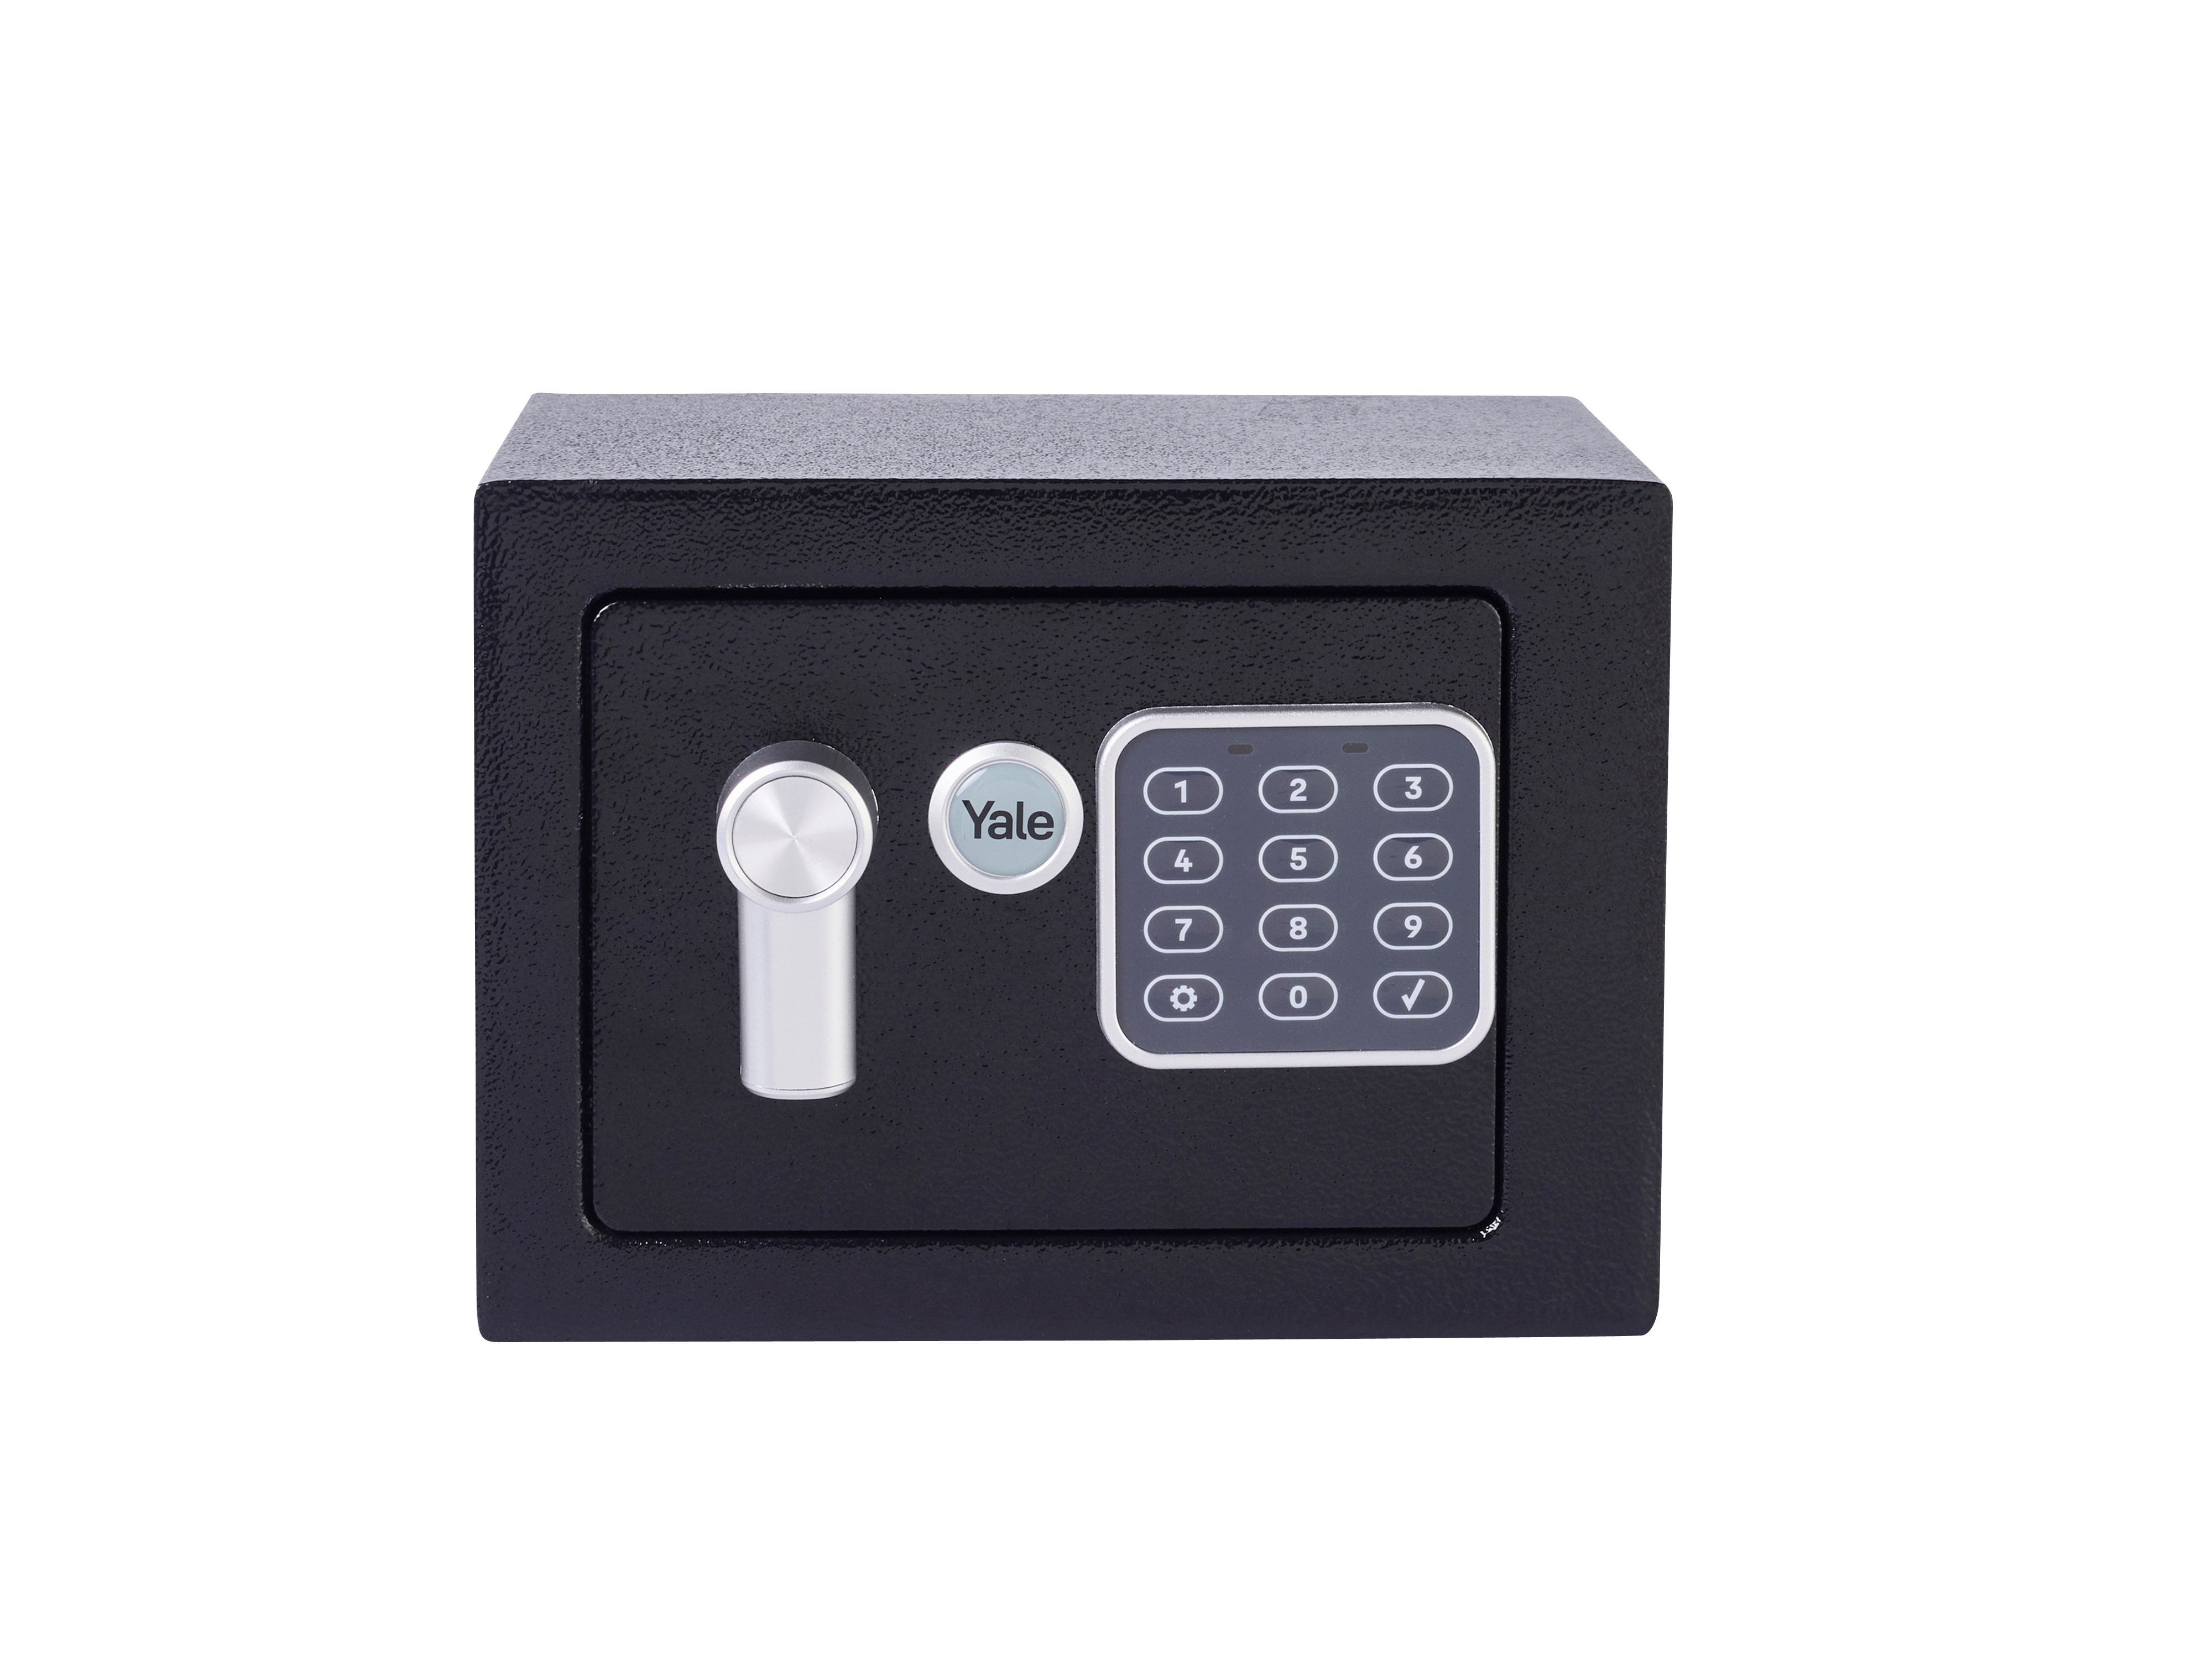 https://static-mpc.assaabloy.com/yalefile//Fetchfile.aspx?id=45488